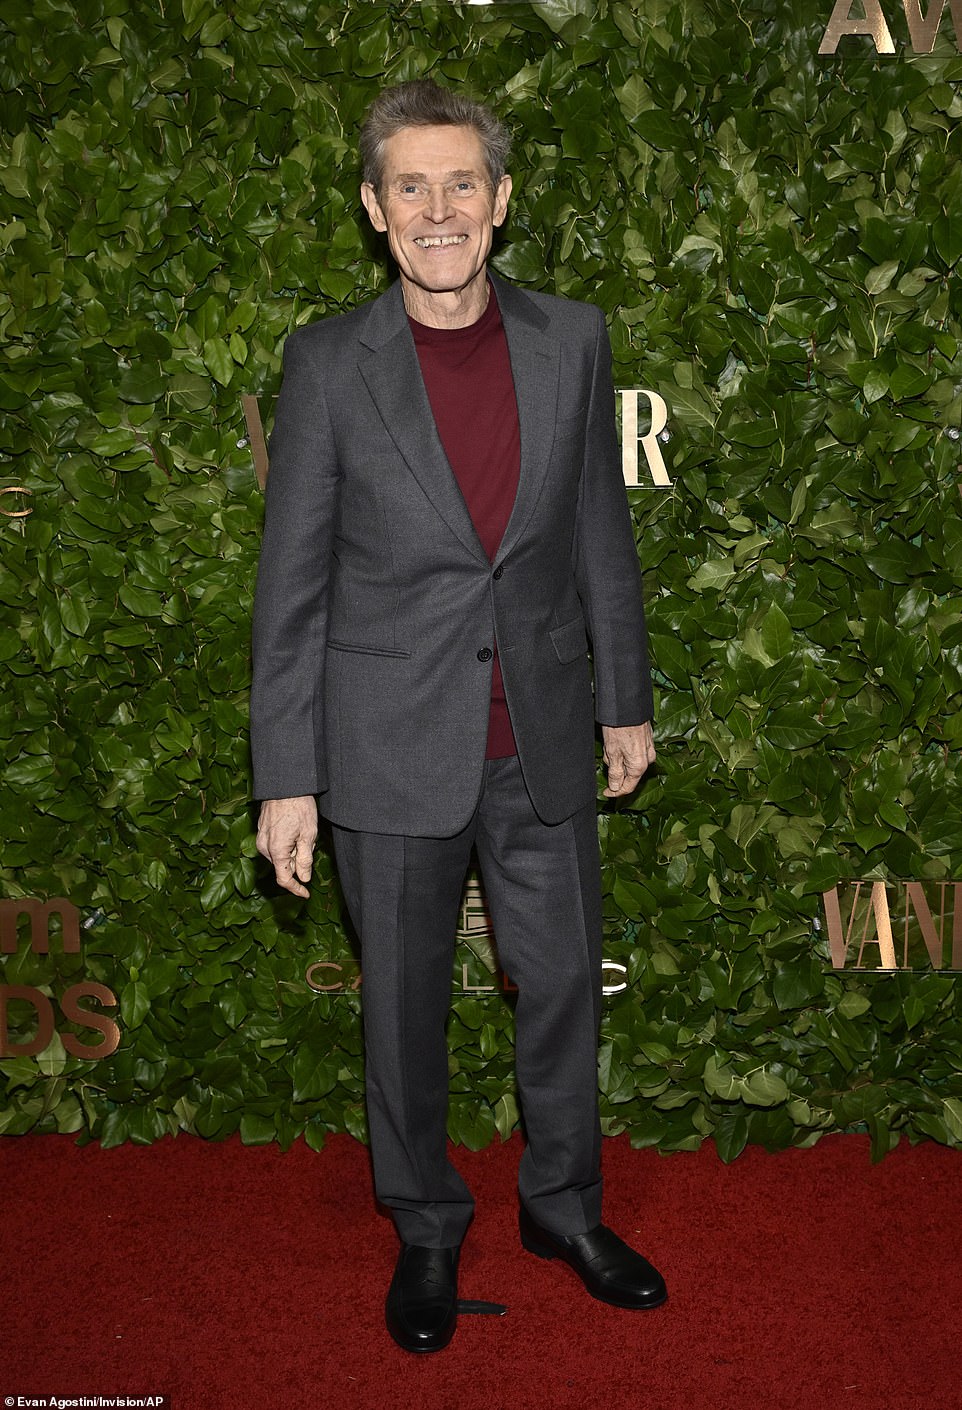 Willem Dafoe, who has earned four Academy Awards over his career, appeared in high spirits as he posed on the red carpet